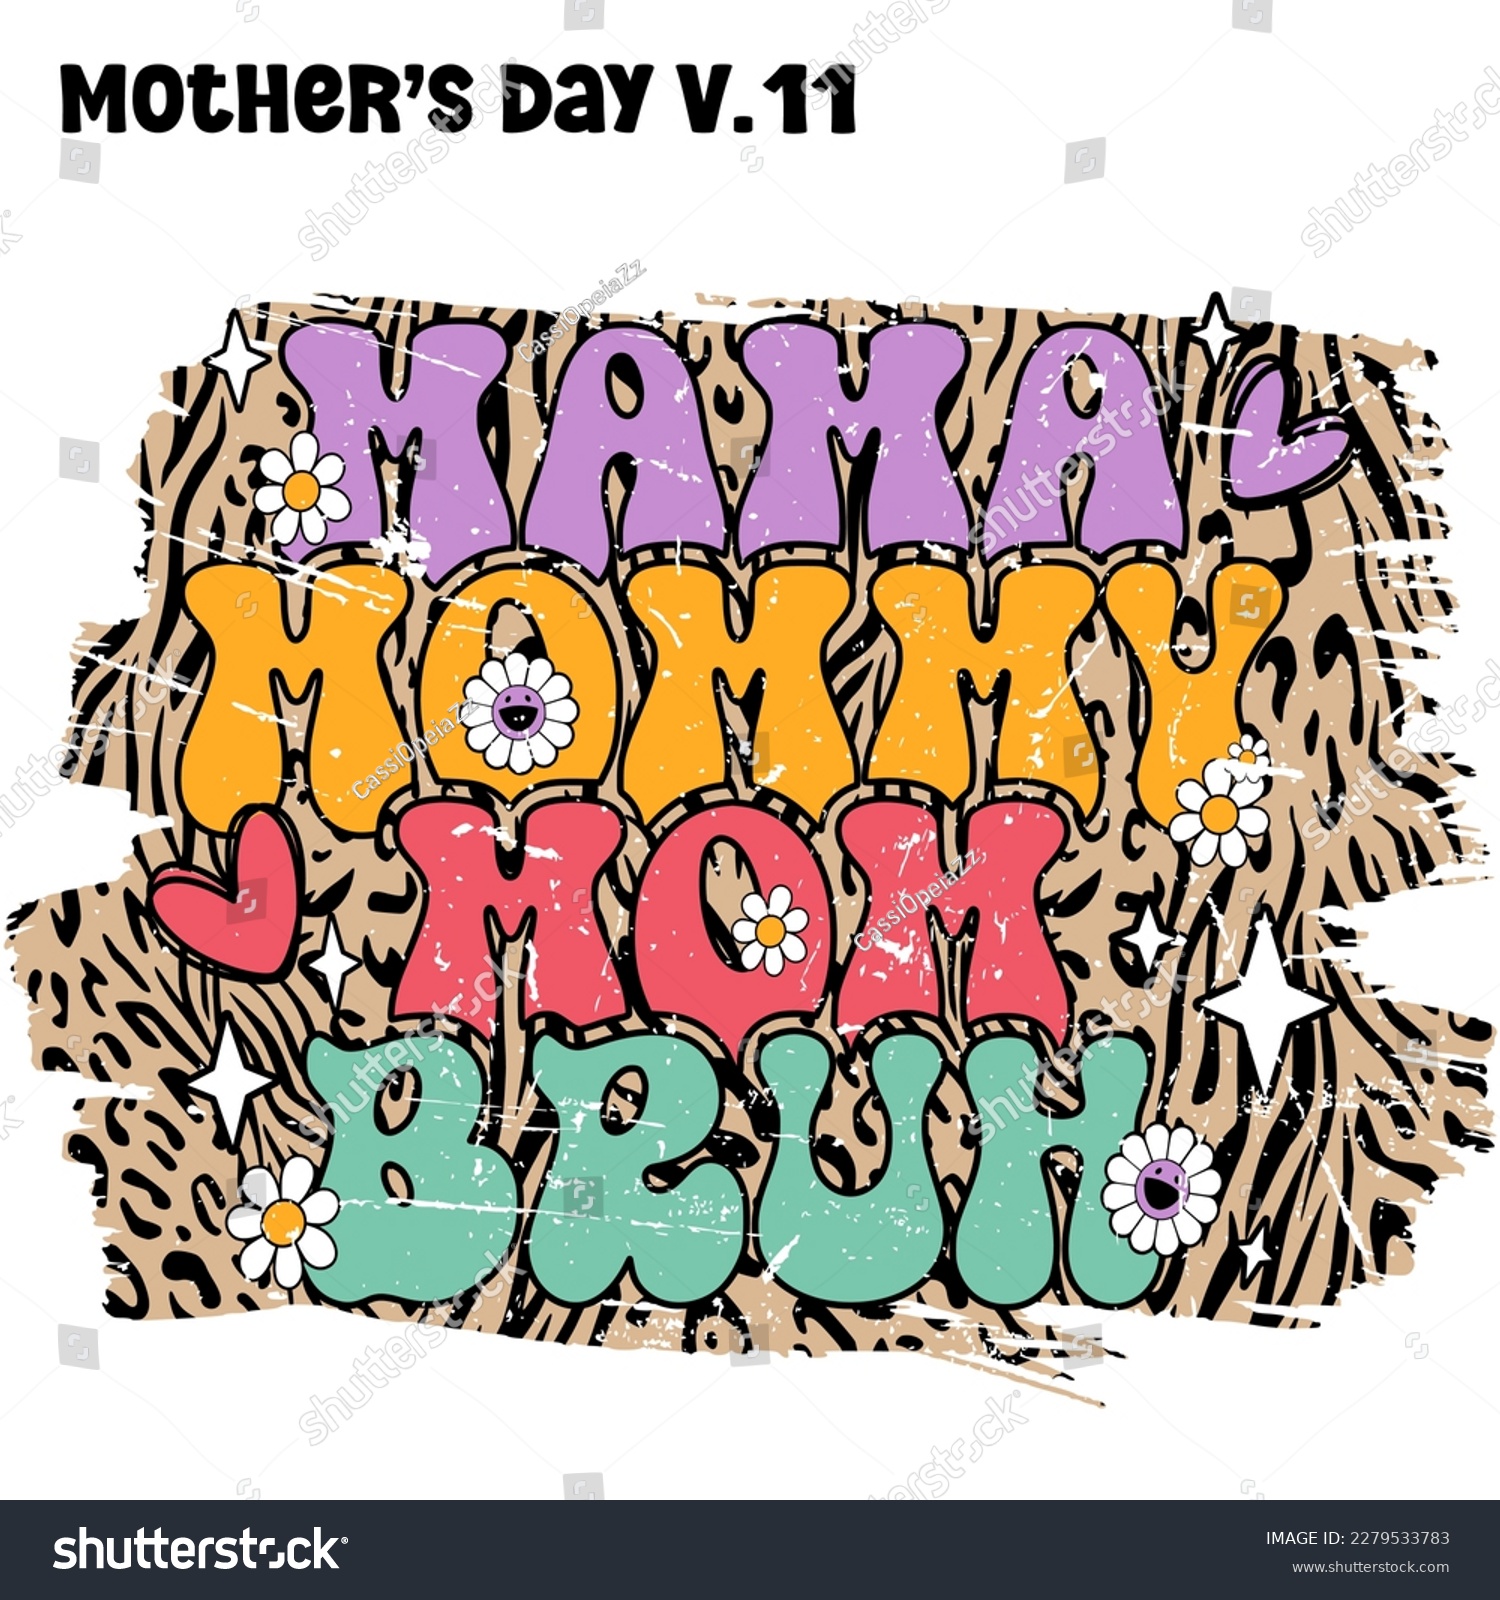 SVG of Mama Mommy Mom Bruh. Mother's Day V.10 , Mama Bruh lettering with flowers and Leopard background texture colorful 70's 80's 90's Retro style EPS. SVG. file design for t-shirt svg